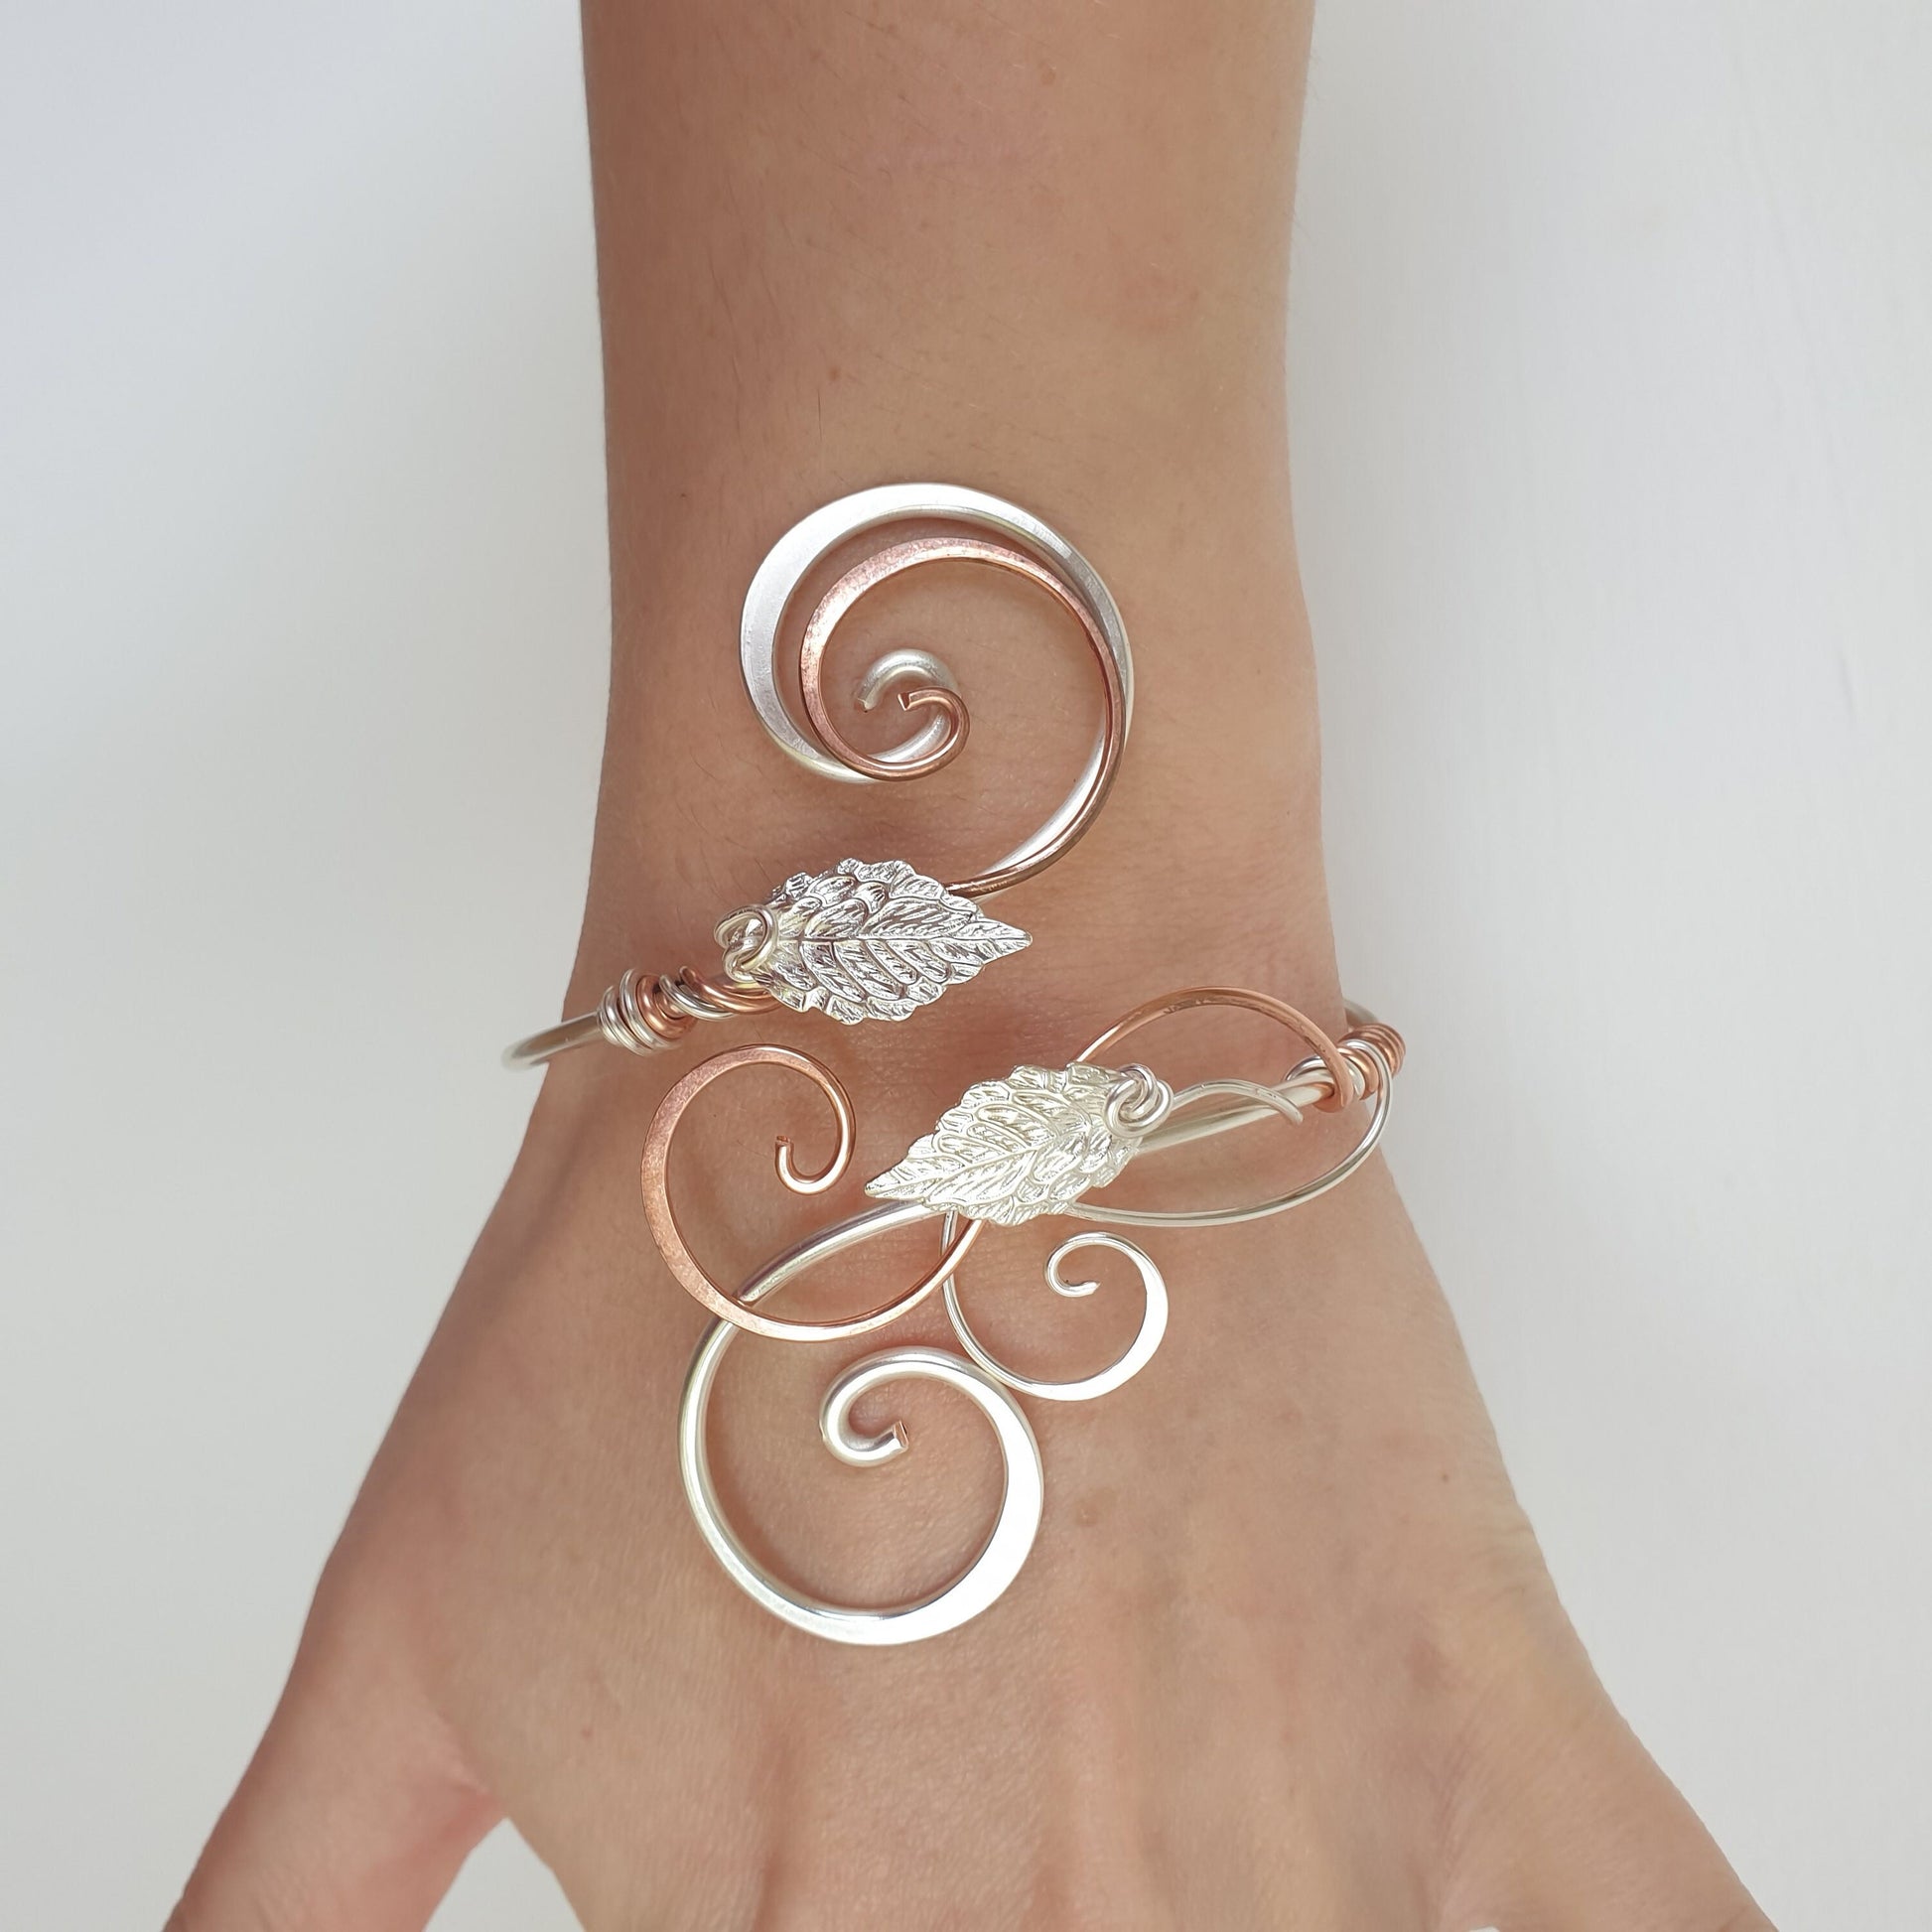 Silver Filigree Cuff Bracelet with Gold Finish